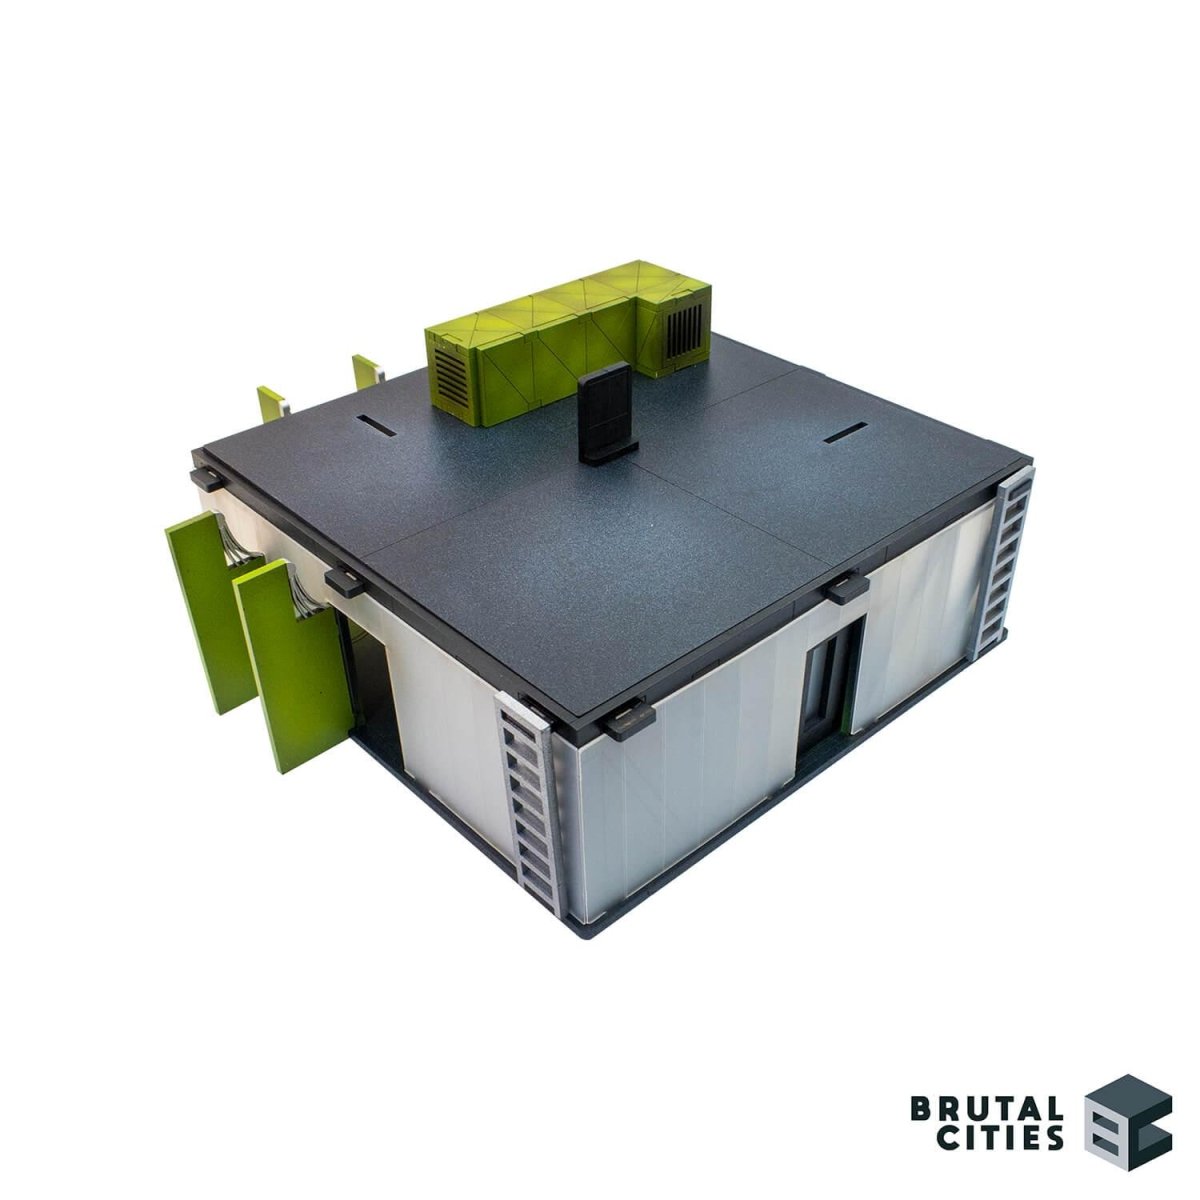 Sci-fi infinity objective room building - 28mm terrain scale painted black and translucent plastic